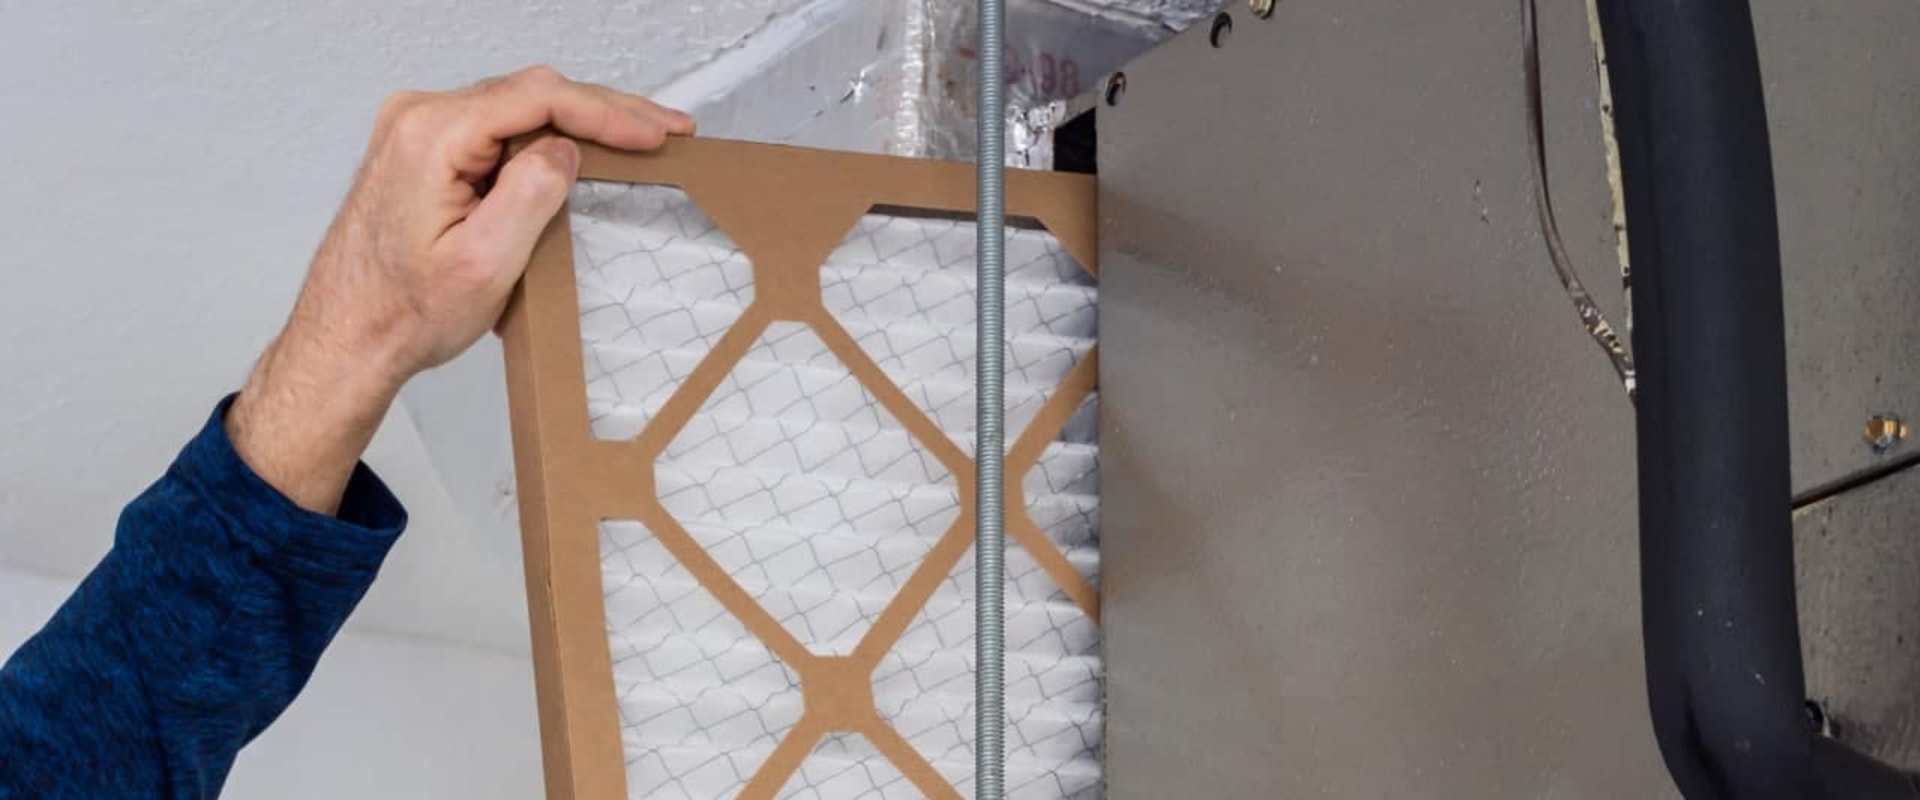 How 12x12x1 Furnace Air Filters Improve Indoor Air Quality?